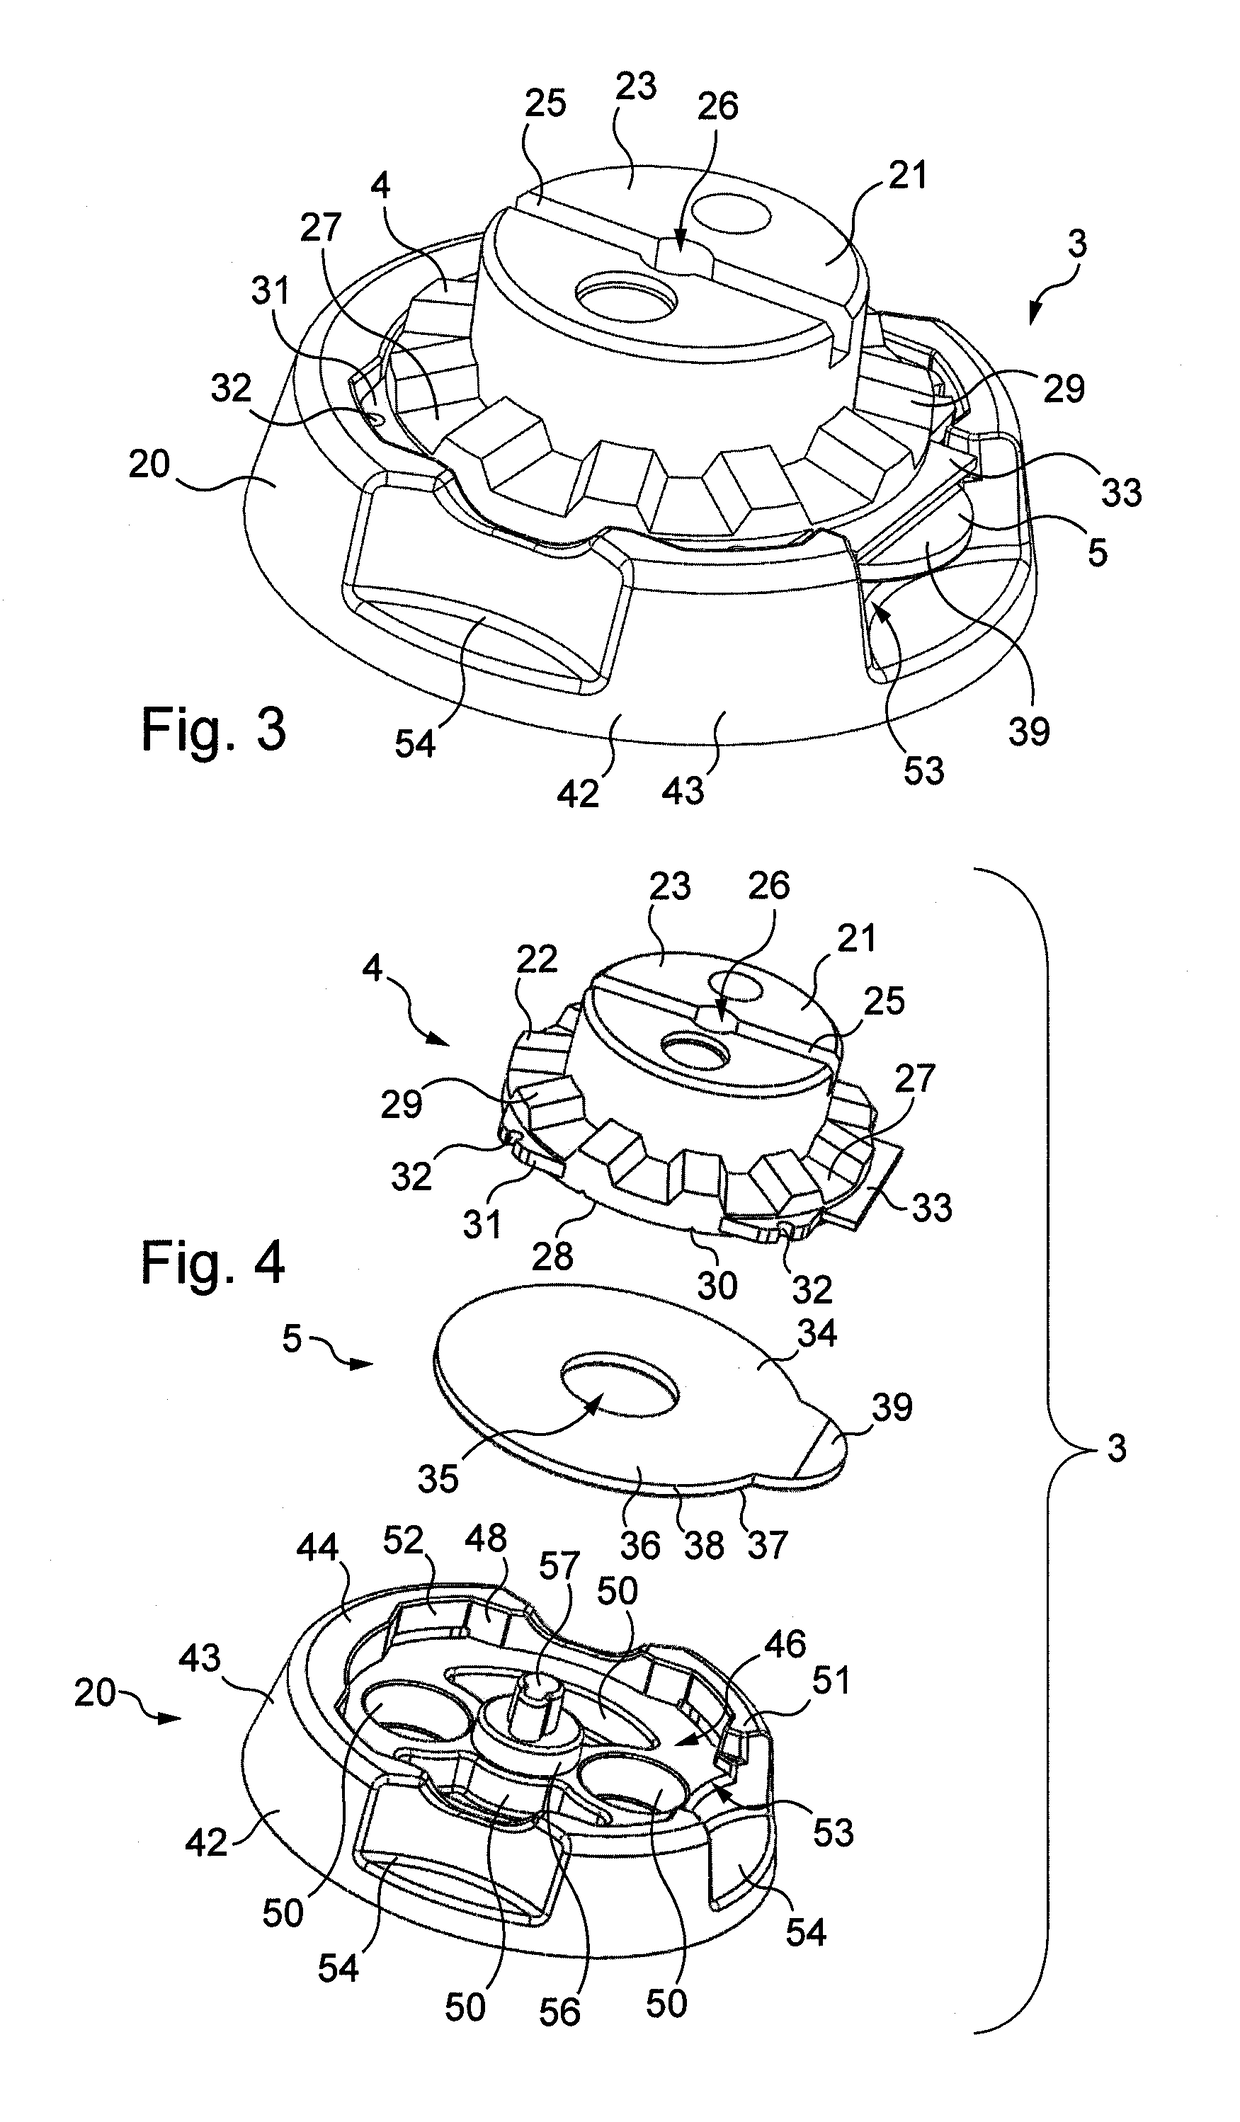 System comprising a positioning and centering pin for an ophthalmic lens, an attachment member and a tool for positioning said attachment member on said positioning and centering pin